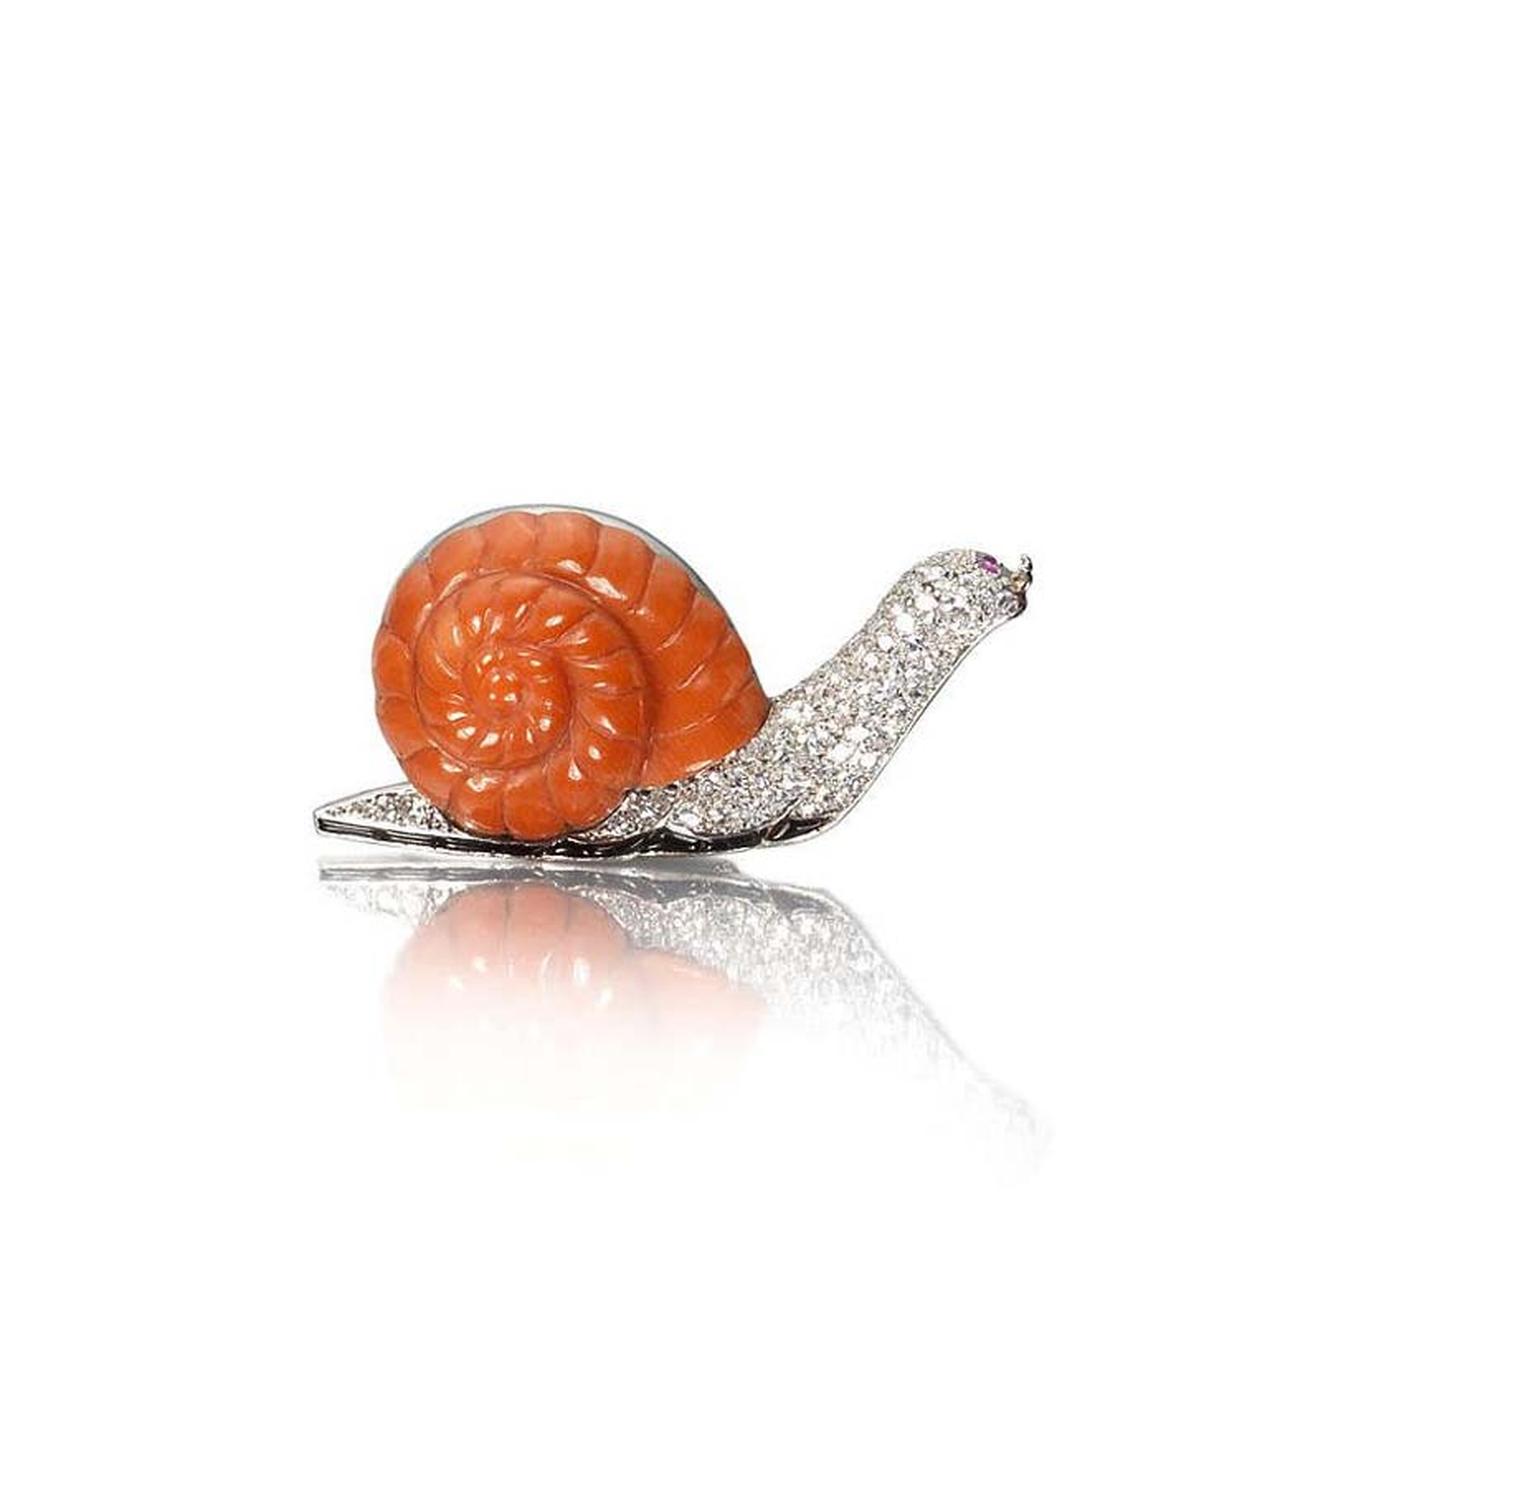 A 1930s Cartier coral and diamond brooch in the shape of a snail far outstripped its £4,000-6,000 estimate to sell for £27,500.